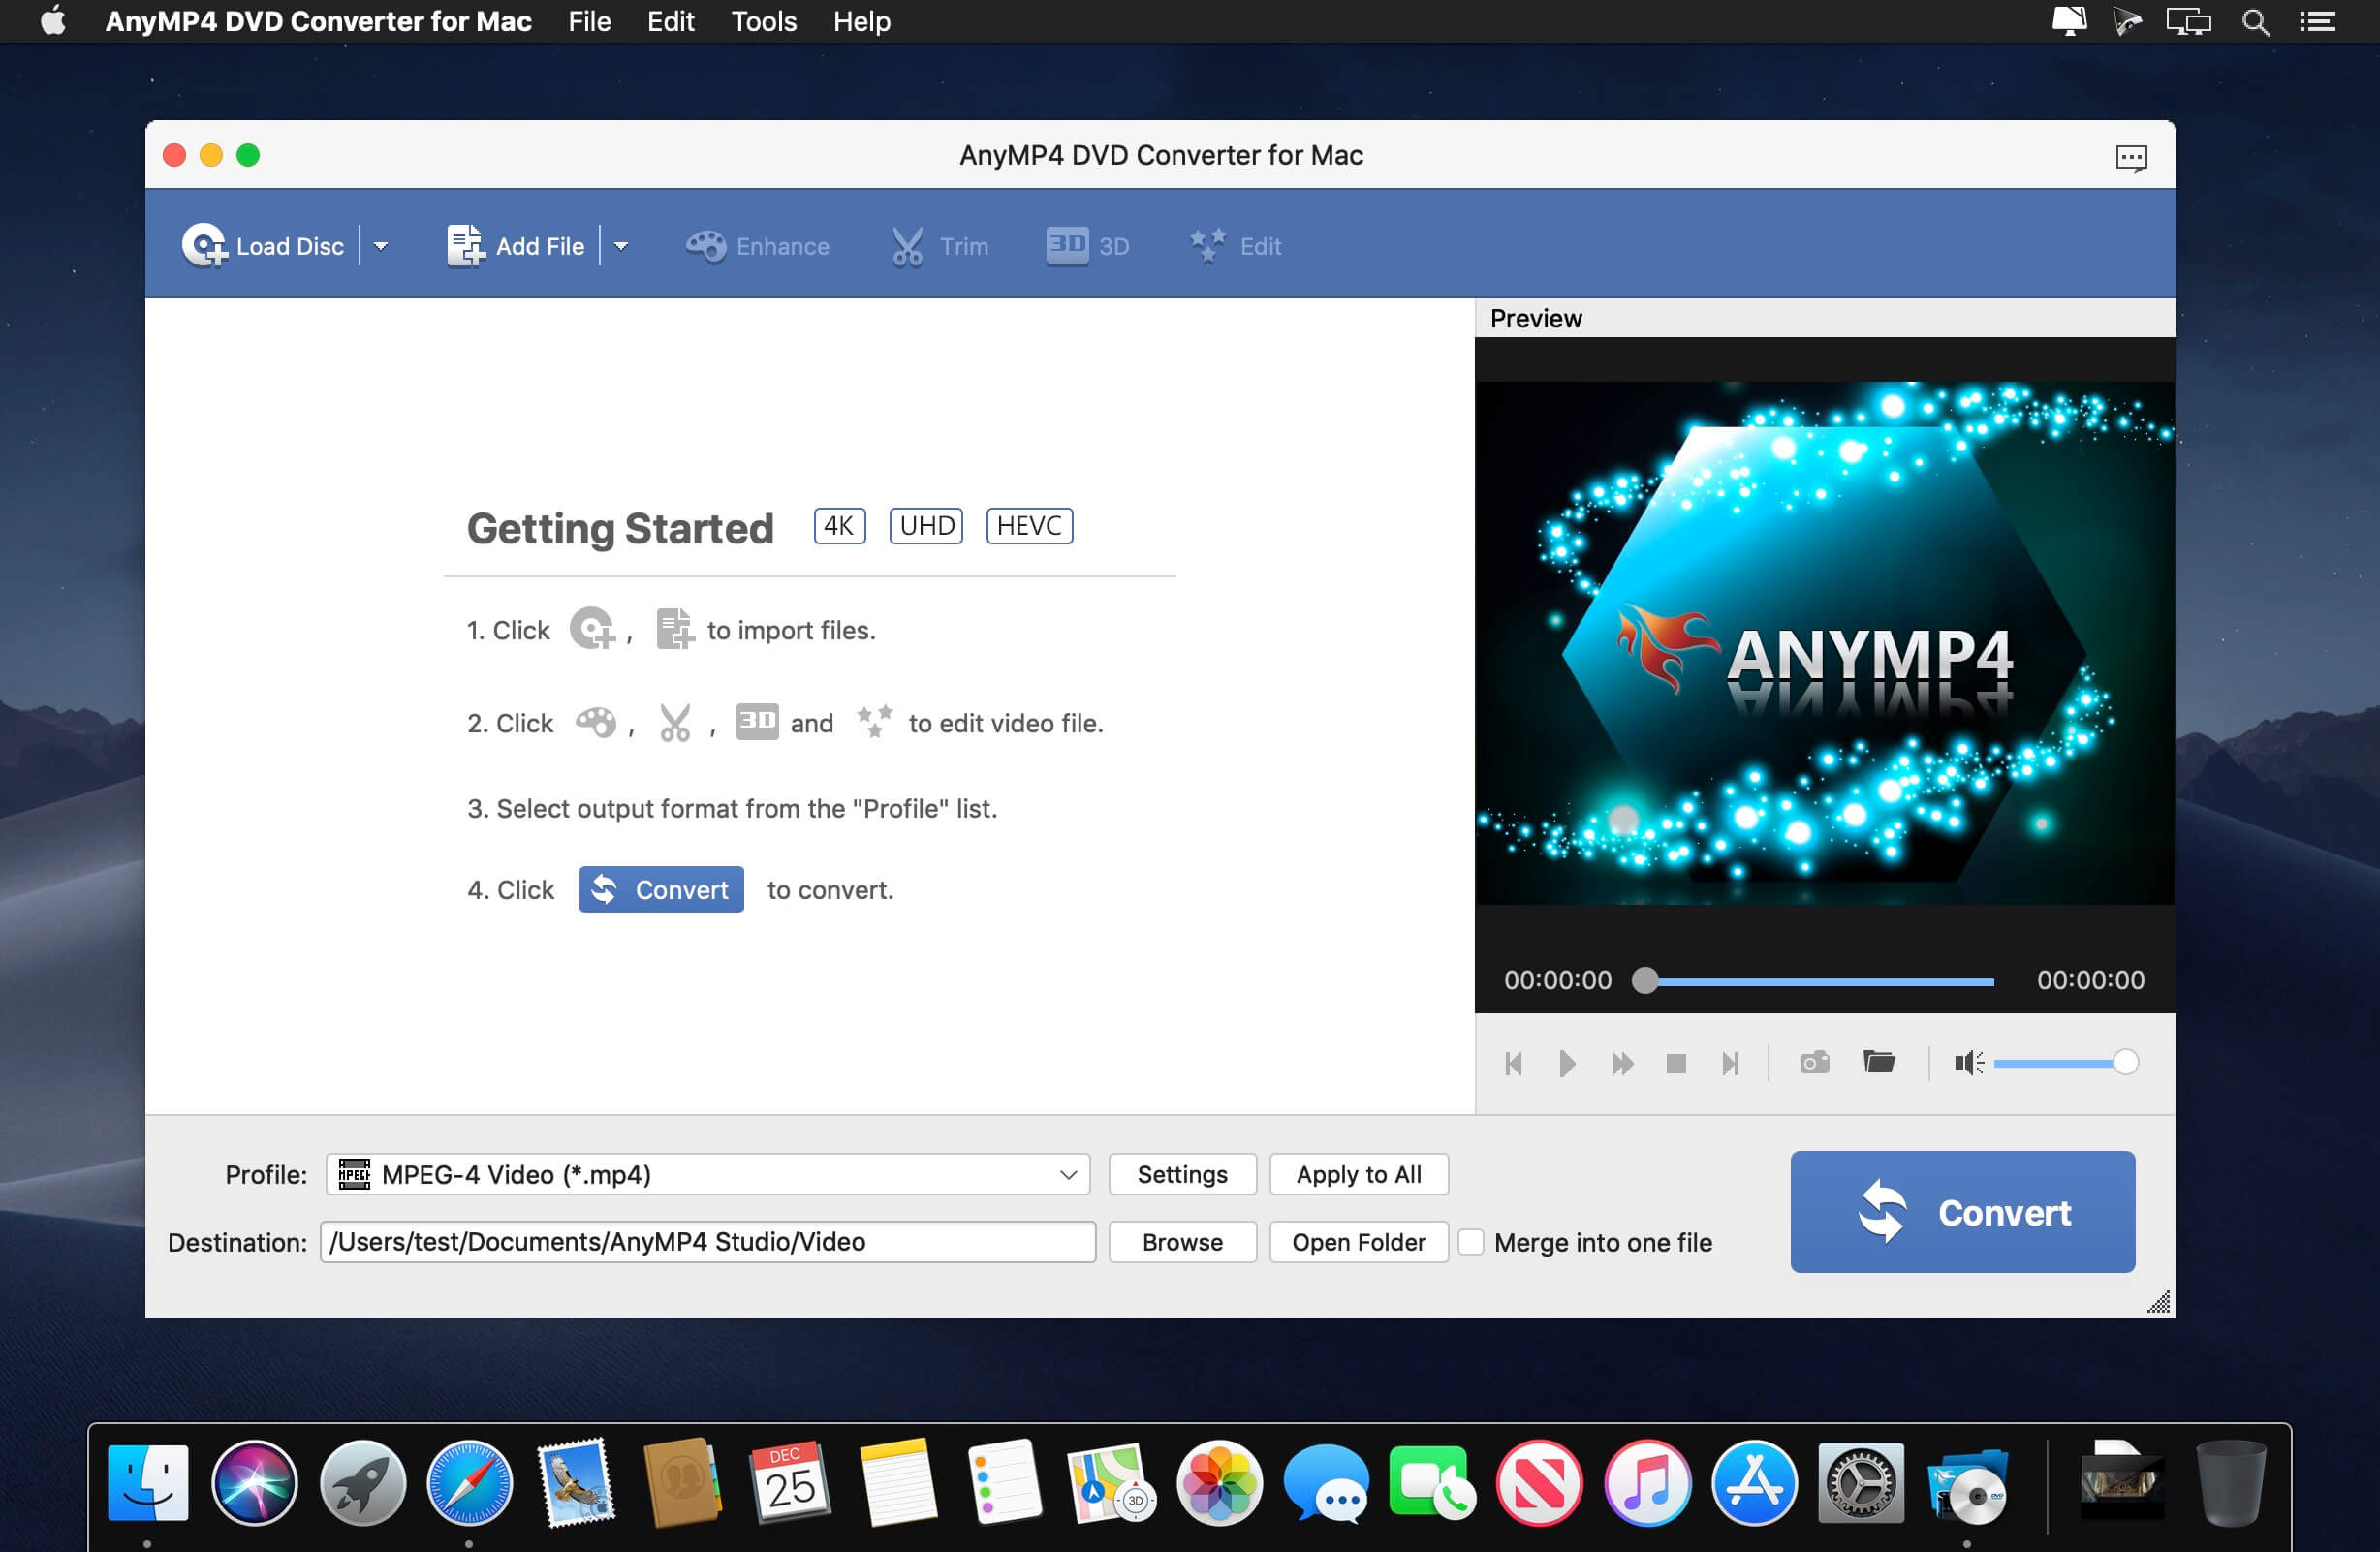 download the last version for ios AnyMP4 DVD Creator 7.2.96